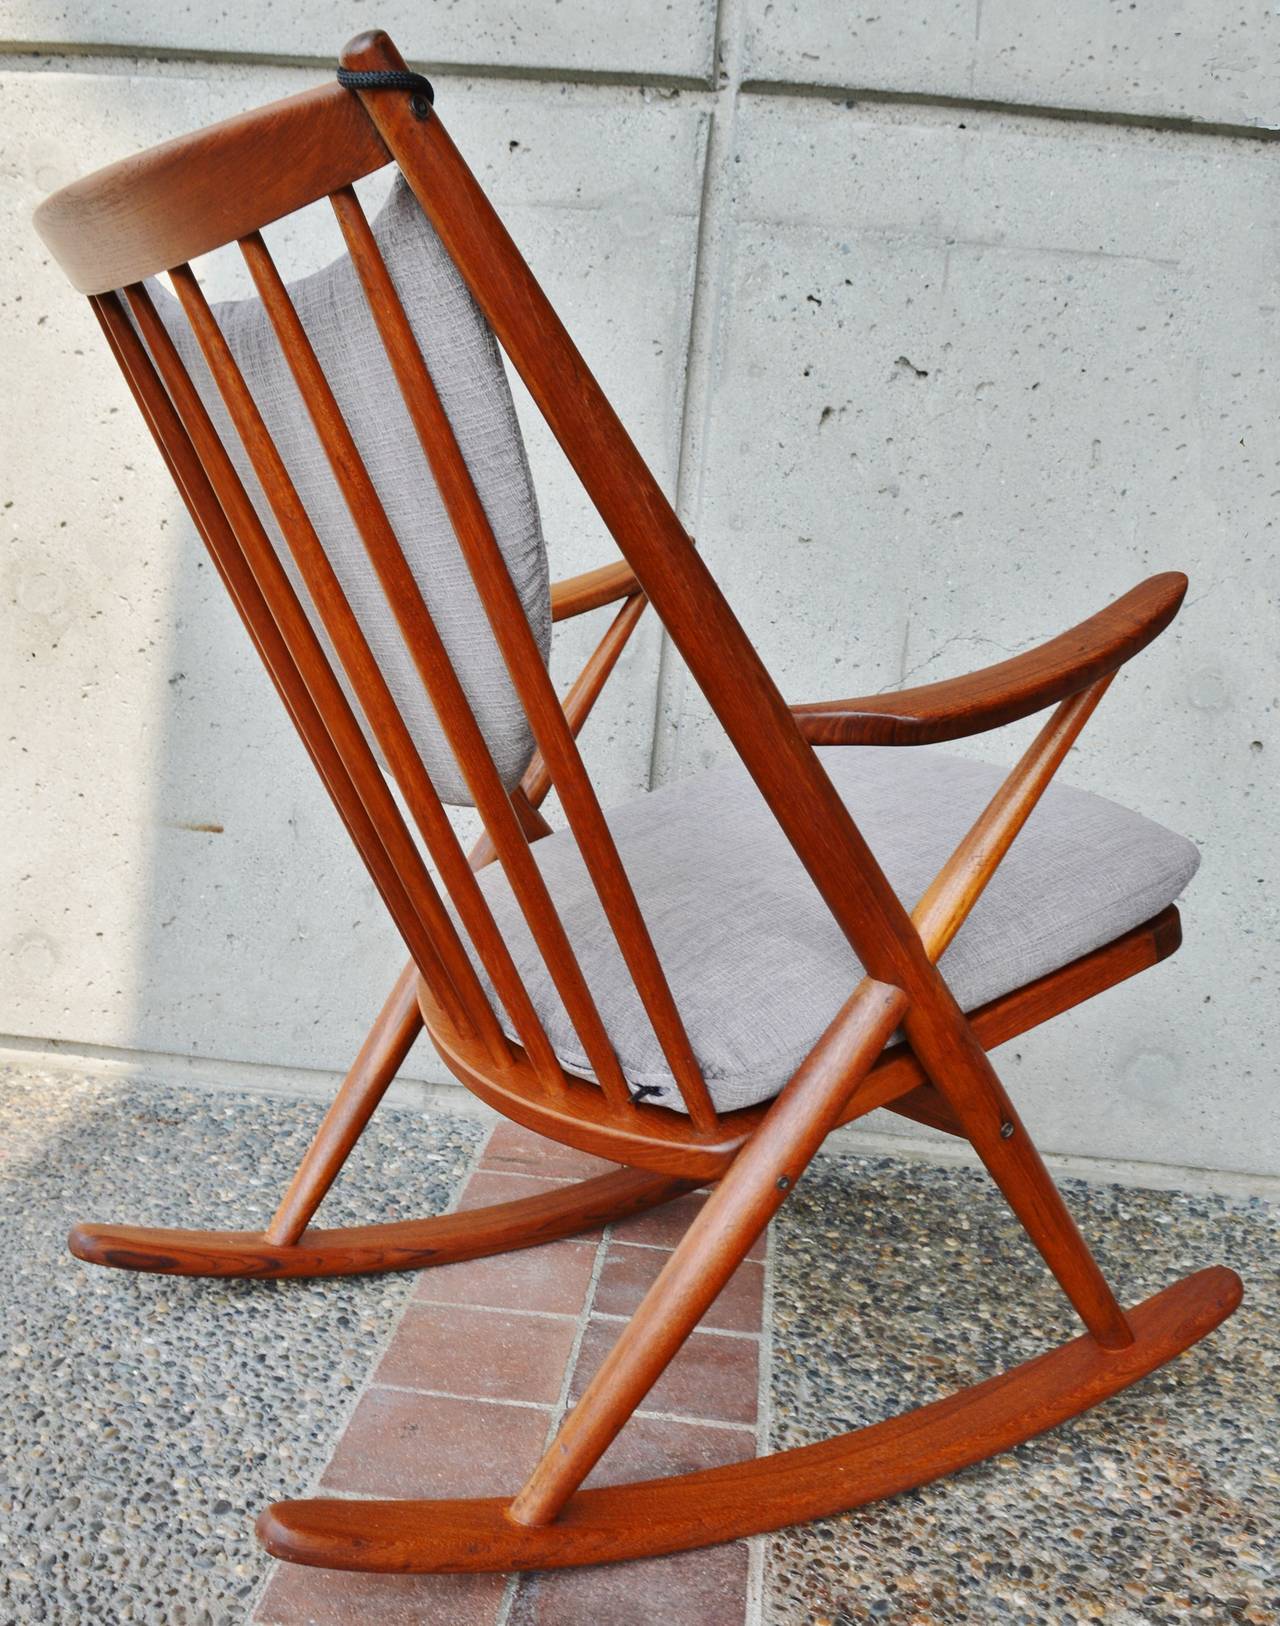 This stellar and iconic Danish Modern teak rocking chair is a beauty! Designed by Frank Reenskaug for Bramin.  Restored and reupholstered with new strapping, 25 year foam and plush light gray textured upholstery, it has the loveliest lines and